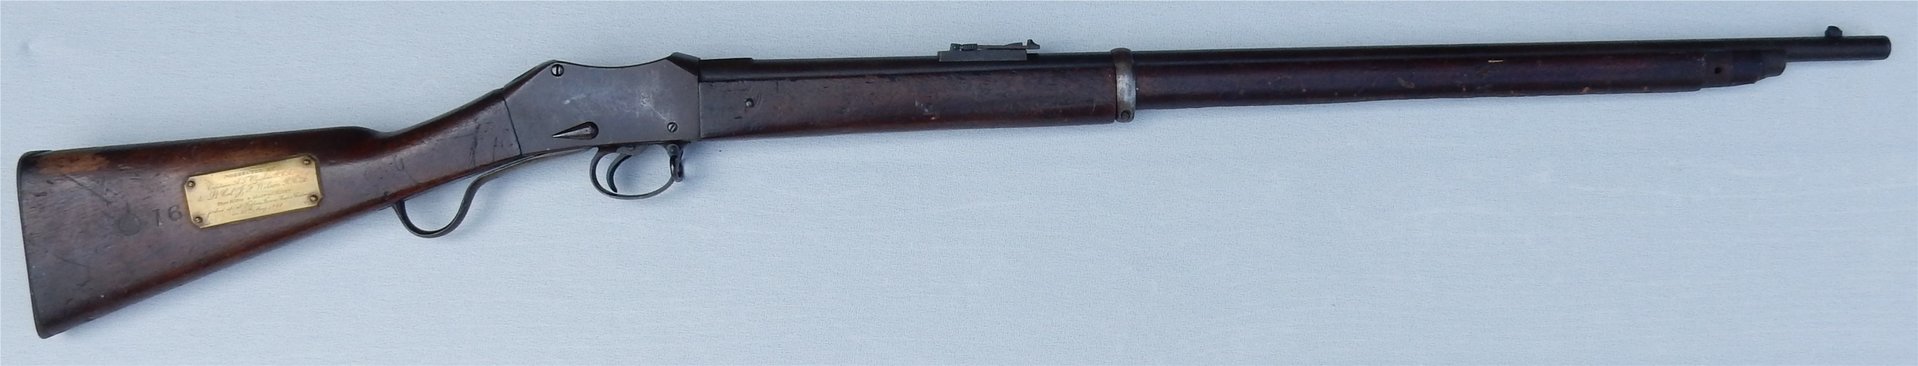 Martini Henry Right Side - Entire Rifle.jpg